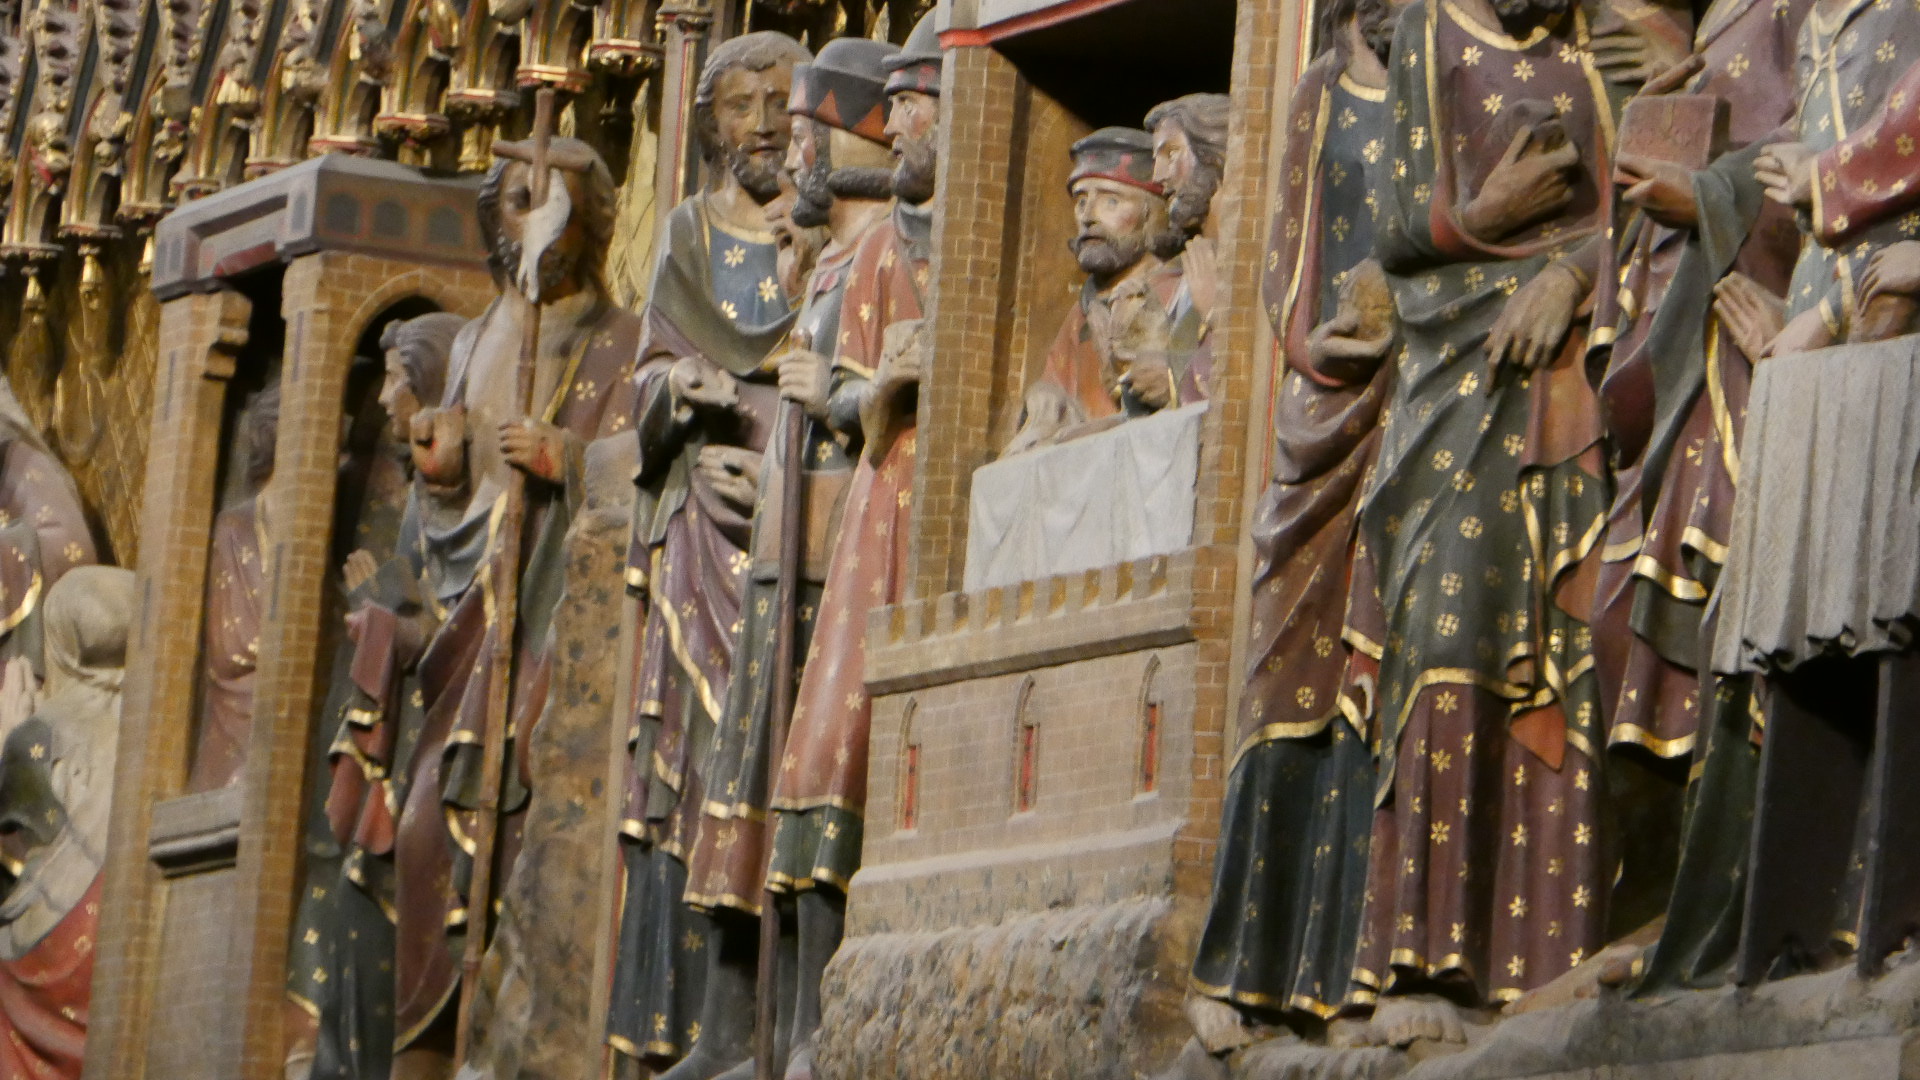 Photo of A different close up view of a scene in the Life of Jesus on one of the 2 giant wooden carvings